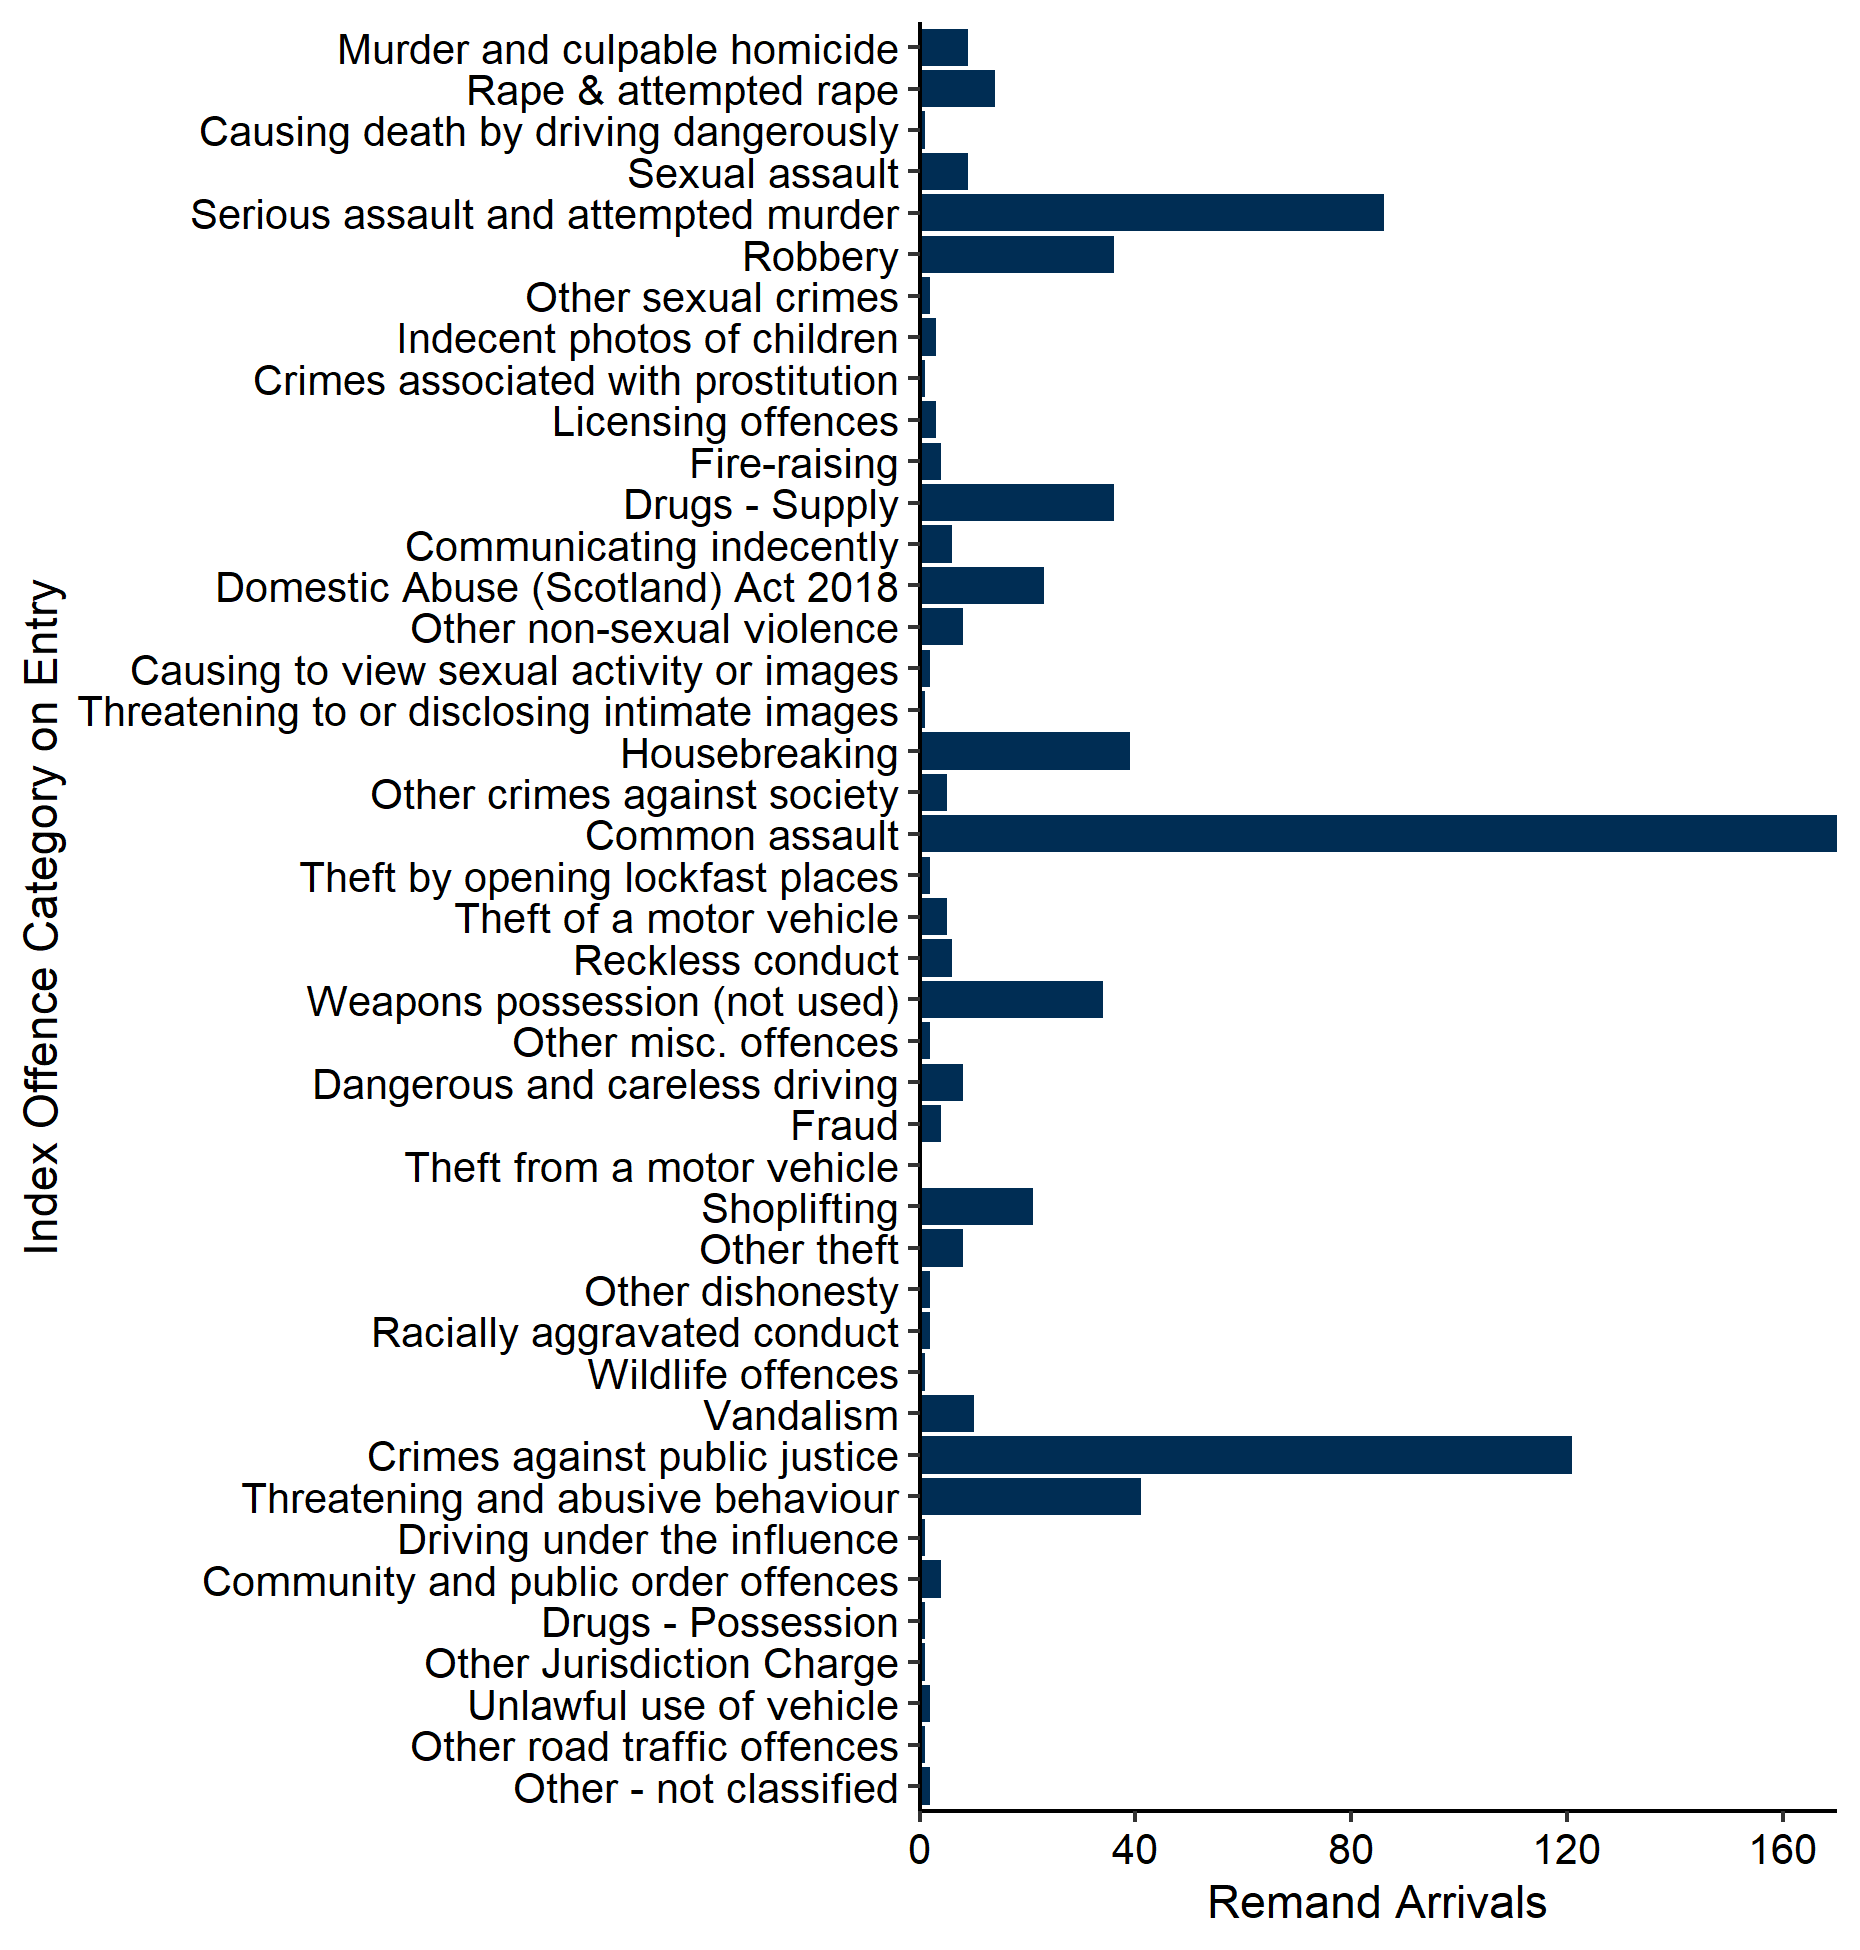 The index offences of the 737 arriving to untried and convicted awaiting sentence legal statuses in January. Most common was common assault (170), followed by crimes against public justice (121), serious assault and attempted murder (86), threatening and abusive behaviour (41) and housebreaking (39). Last updated February 2024. Next update due March 2024.